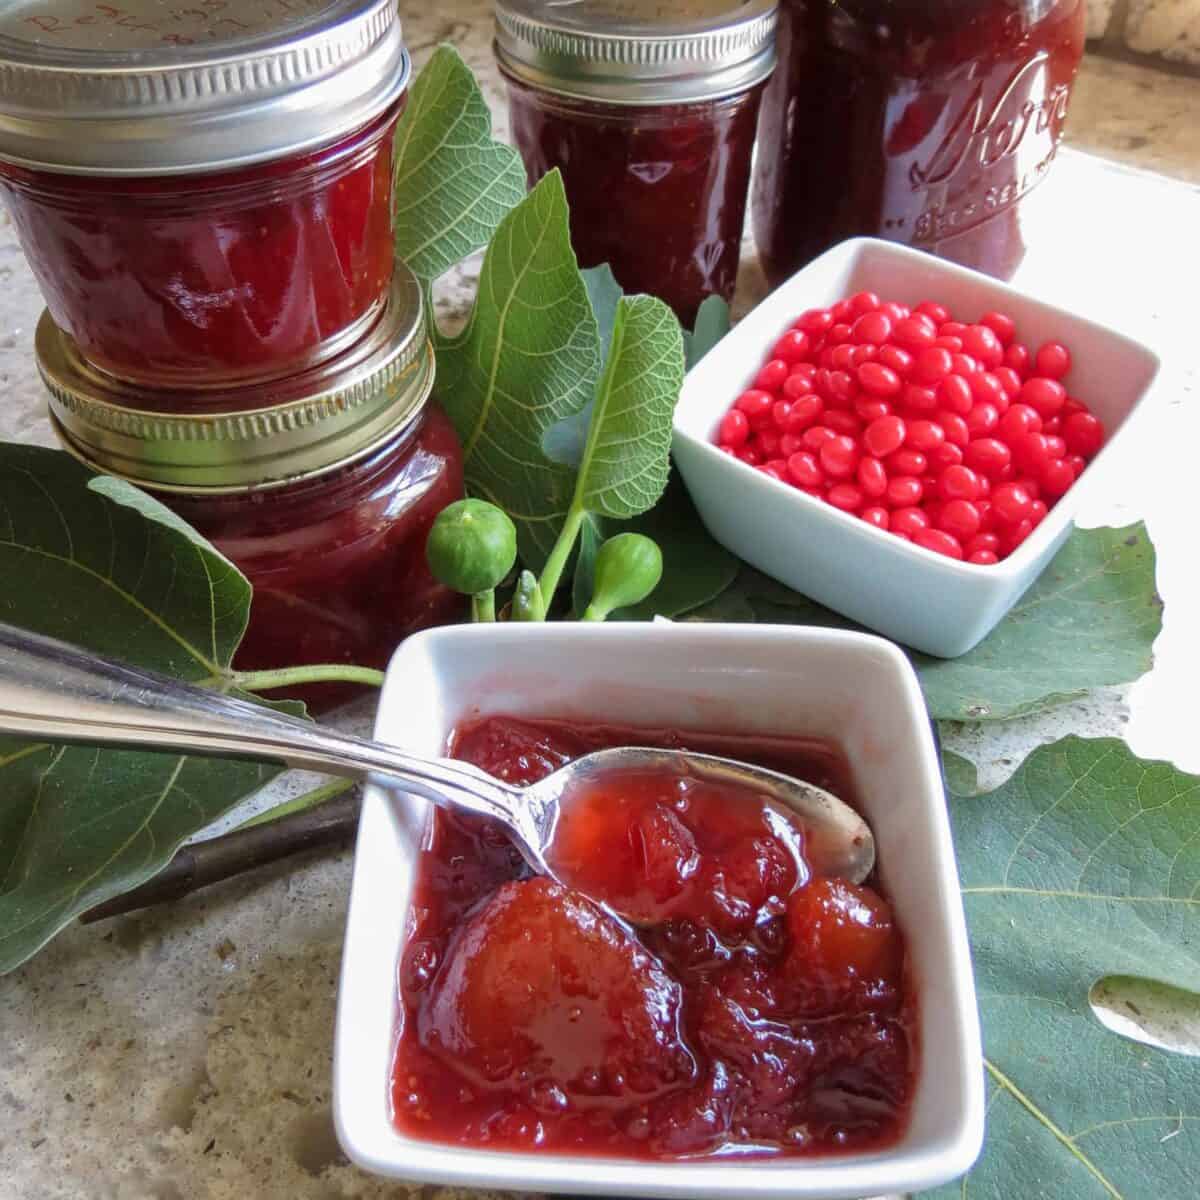 Bowls of fig jam and red hots with jars of fig jam.